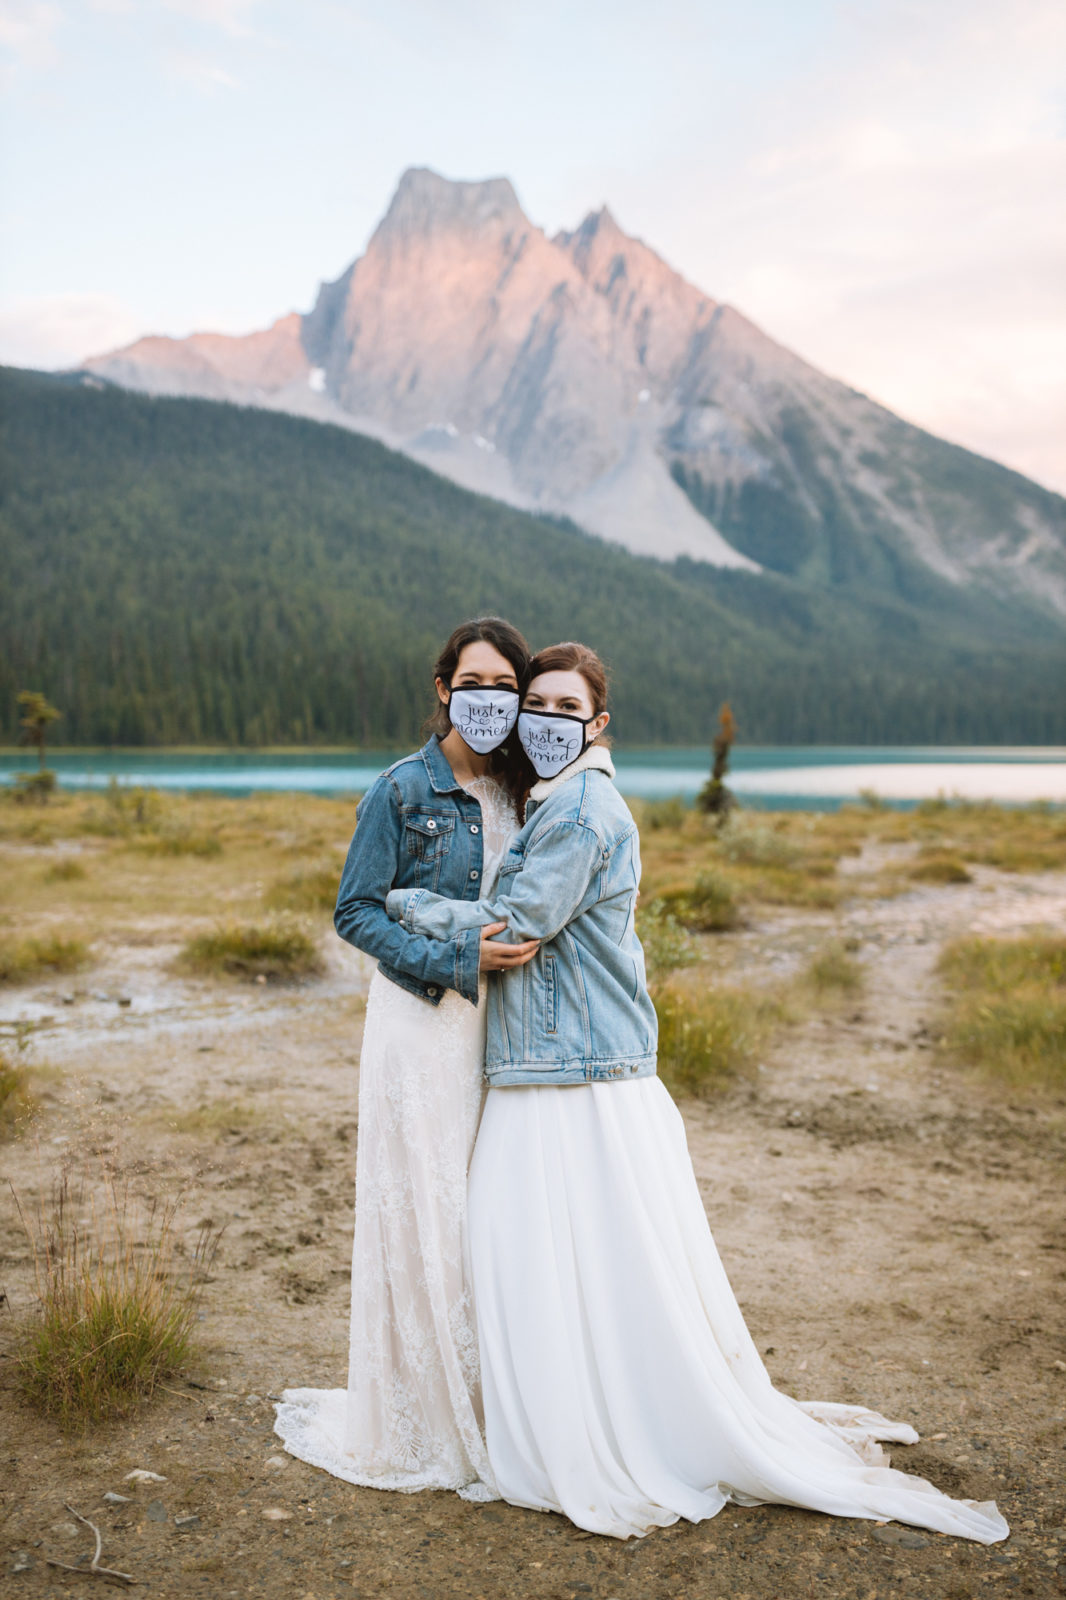 Newly weds pose in their matching jean jackets and Just Married masks for their Elopement in Yoho National Park